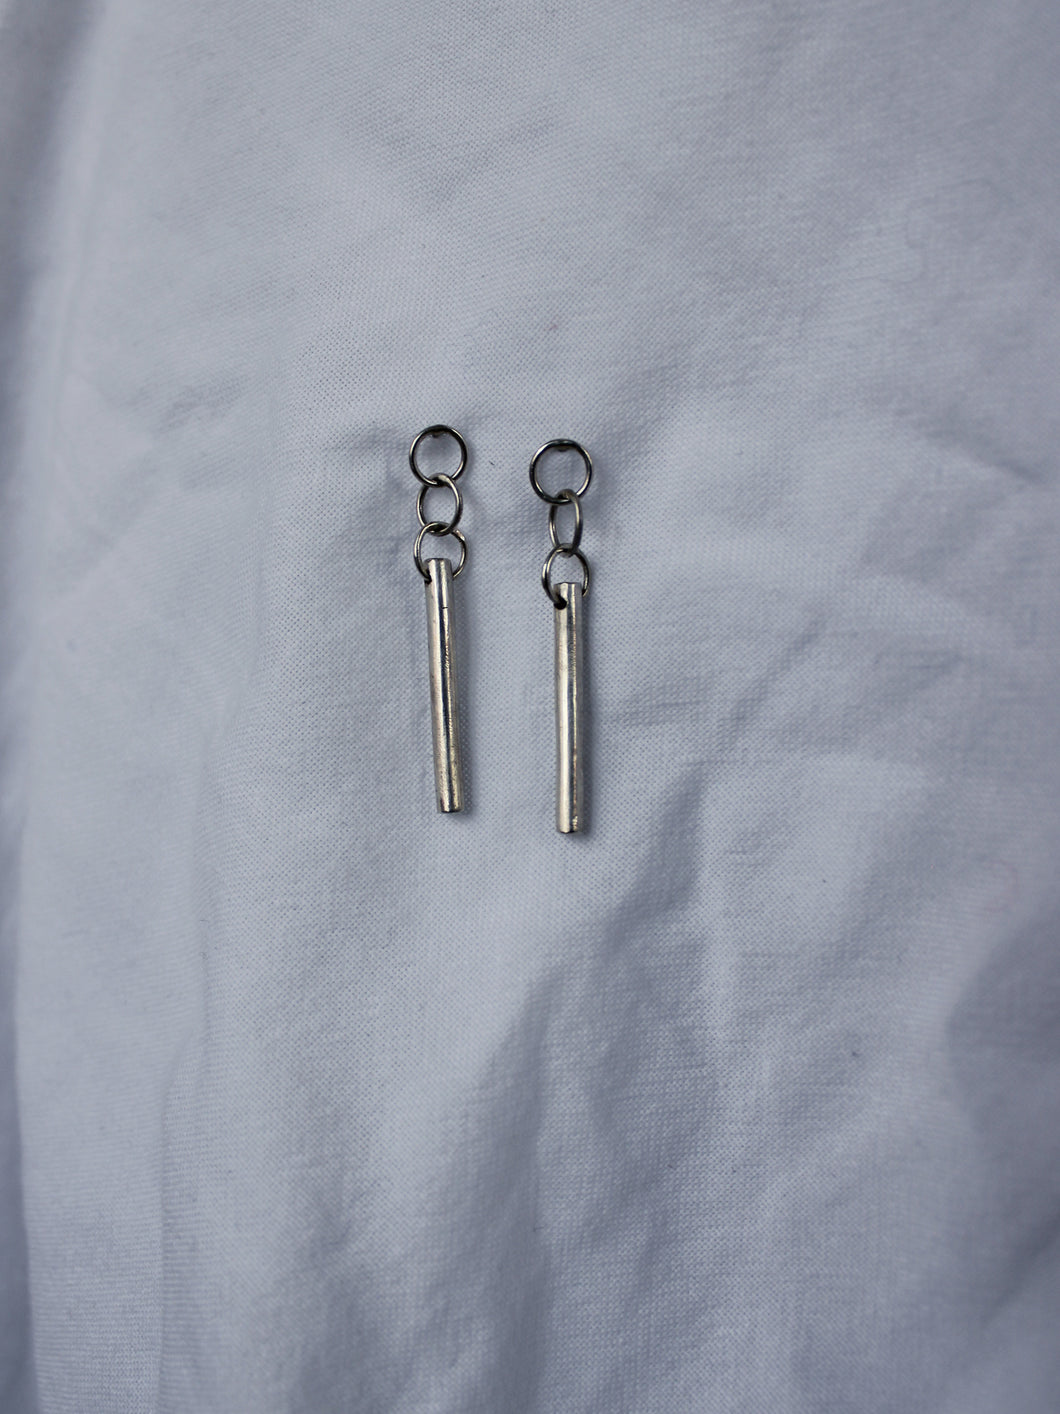 Nordic minimalistic design earrings. Handmade in recycled sterling silver